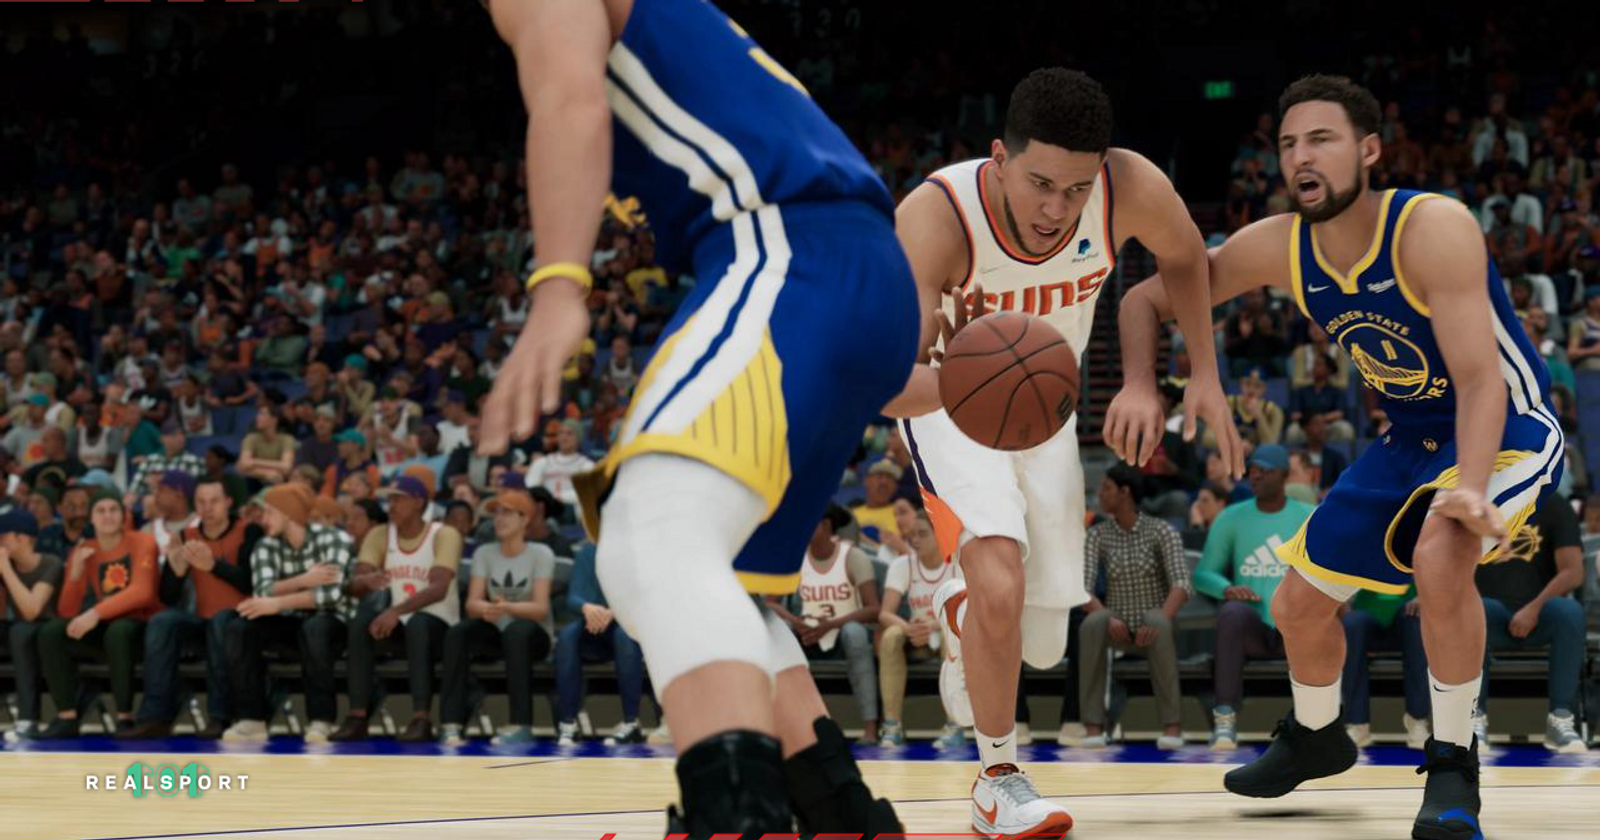 One-on-one with the Islanders on NBA 2K